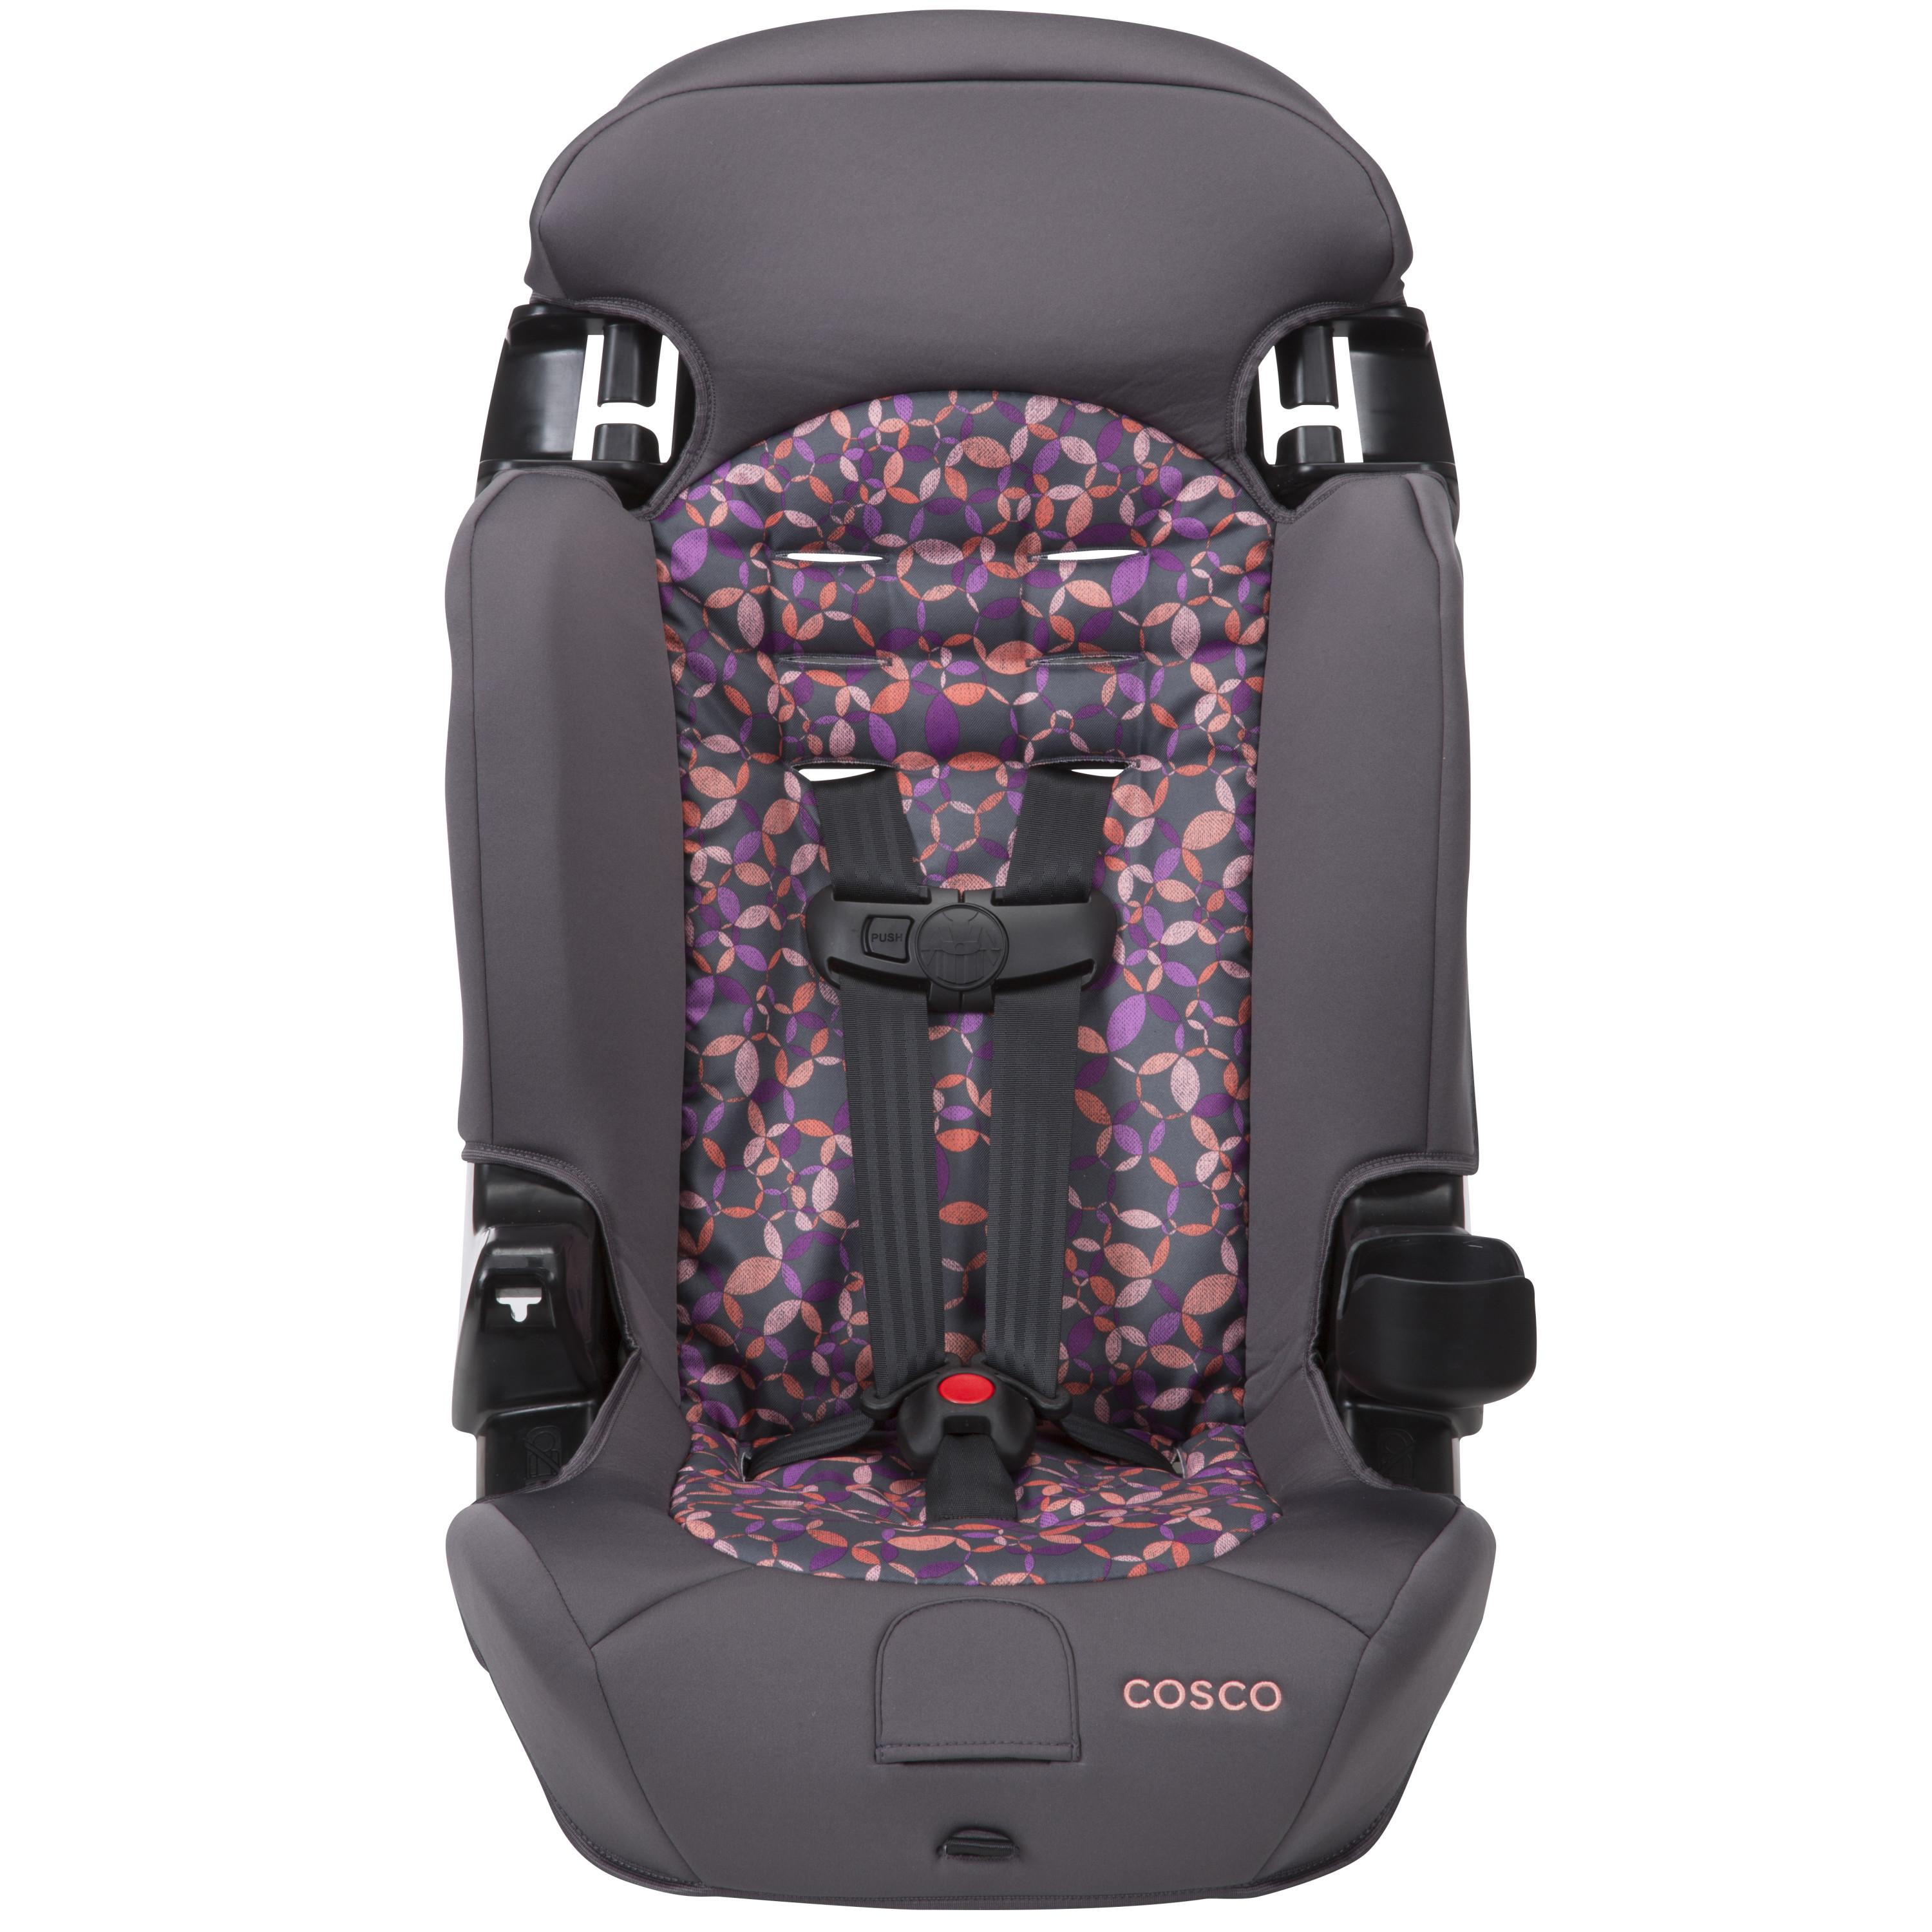 Cosco Finale Booster Car Seat, Floral Gray - image 1 of 25